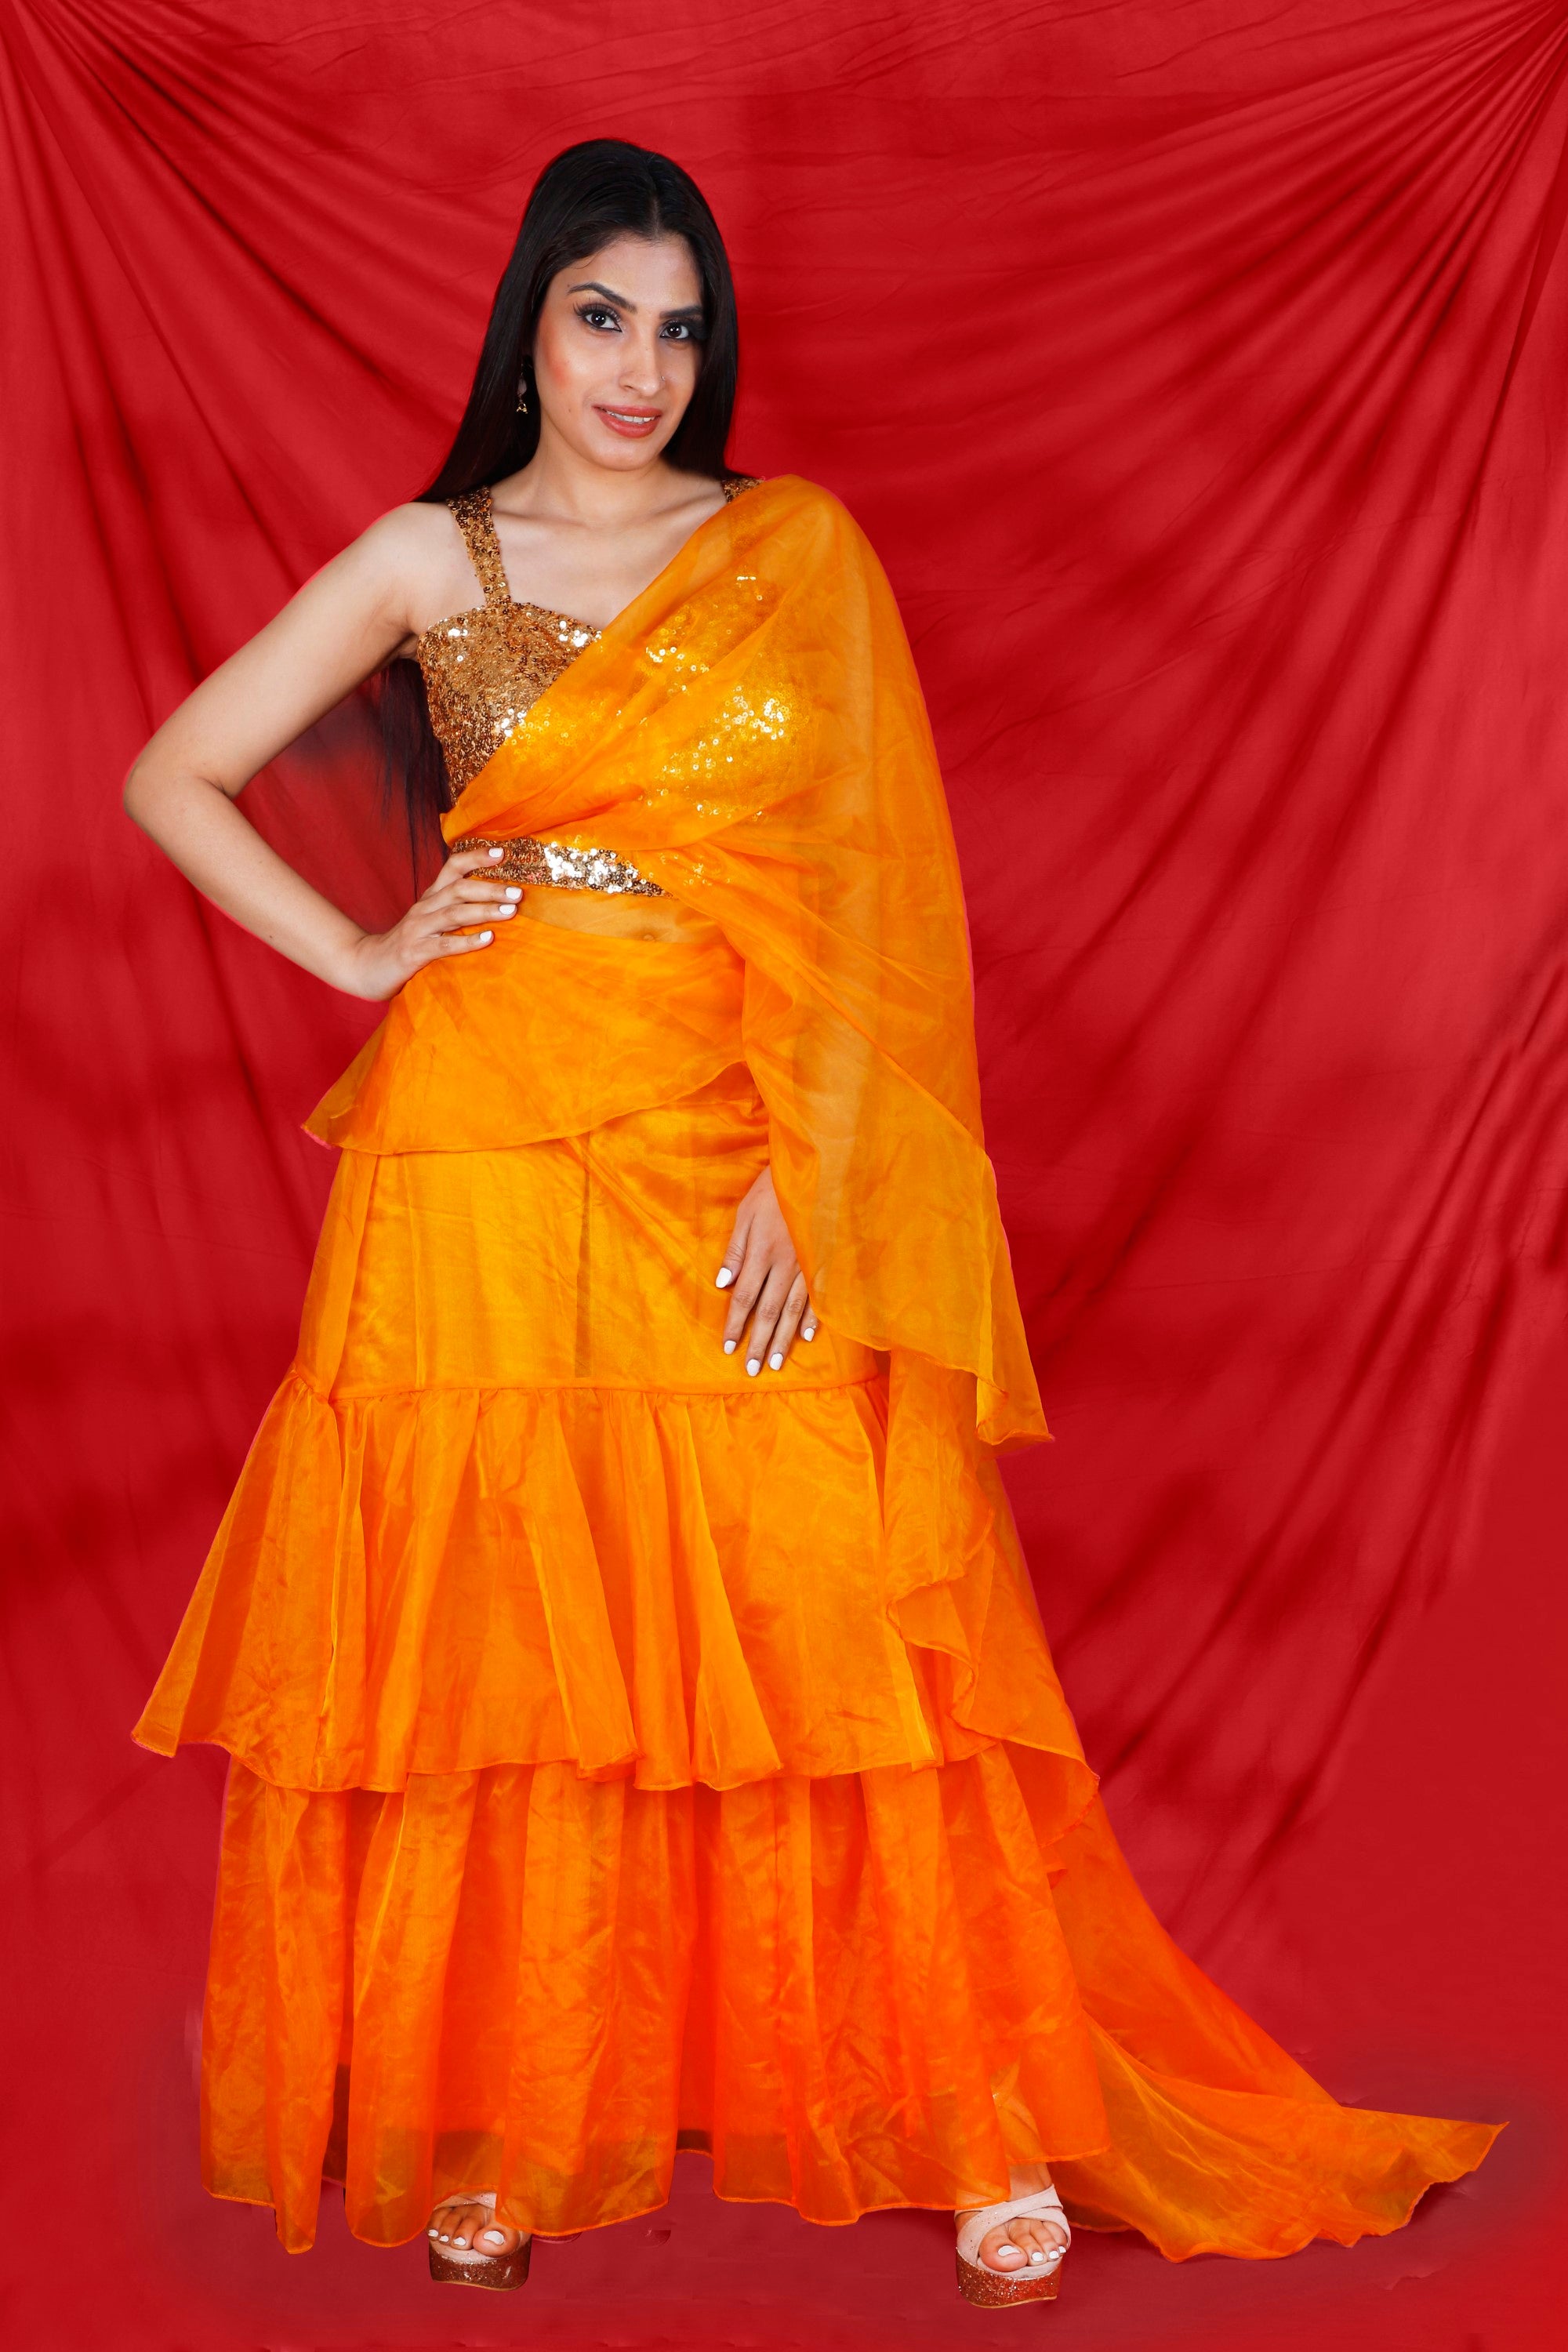 Women's Multitier Organza Saree with Ruffle pallu with Sequins sweetheart neckline Blouse and Belt - MIRACOLOS by Ruchi